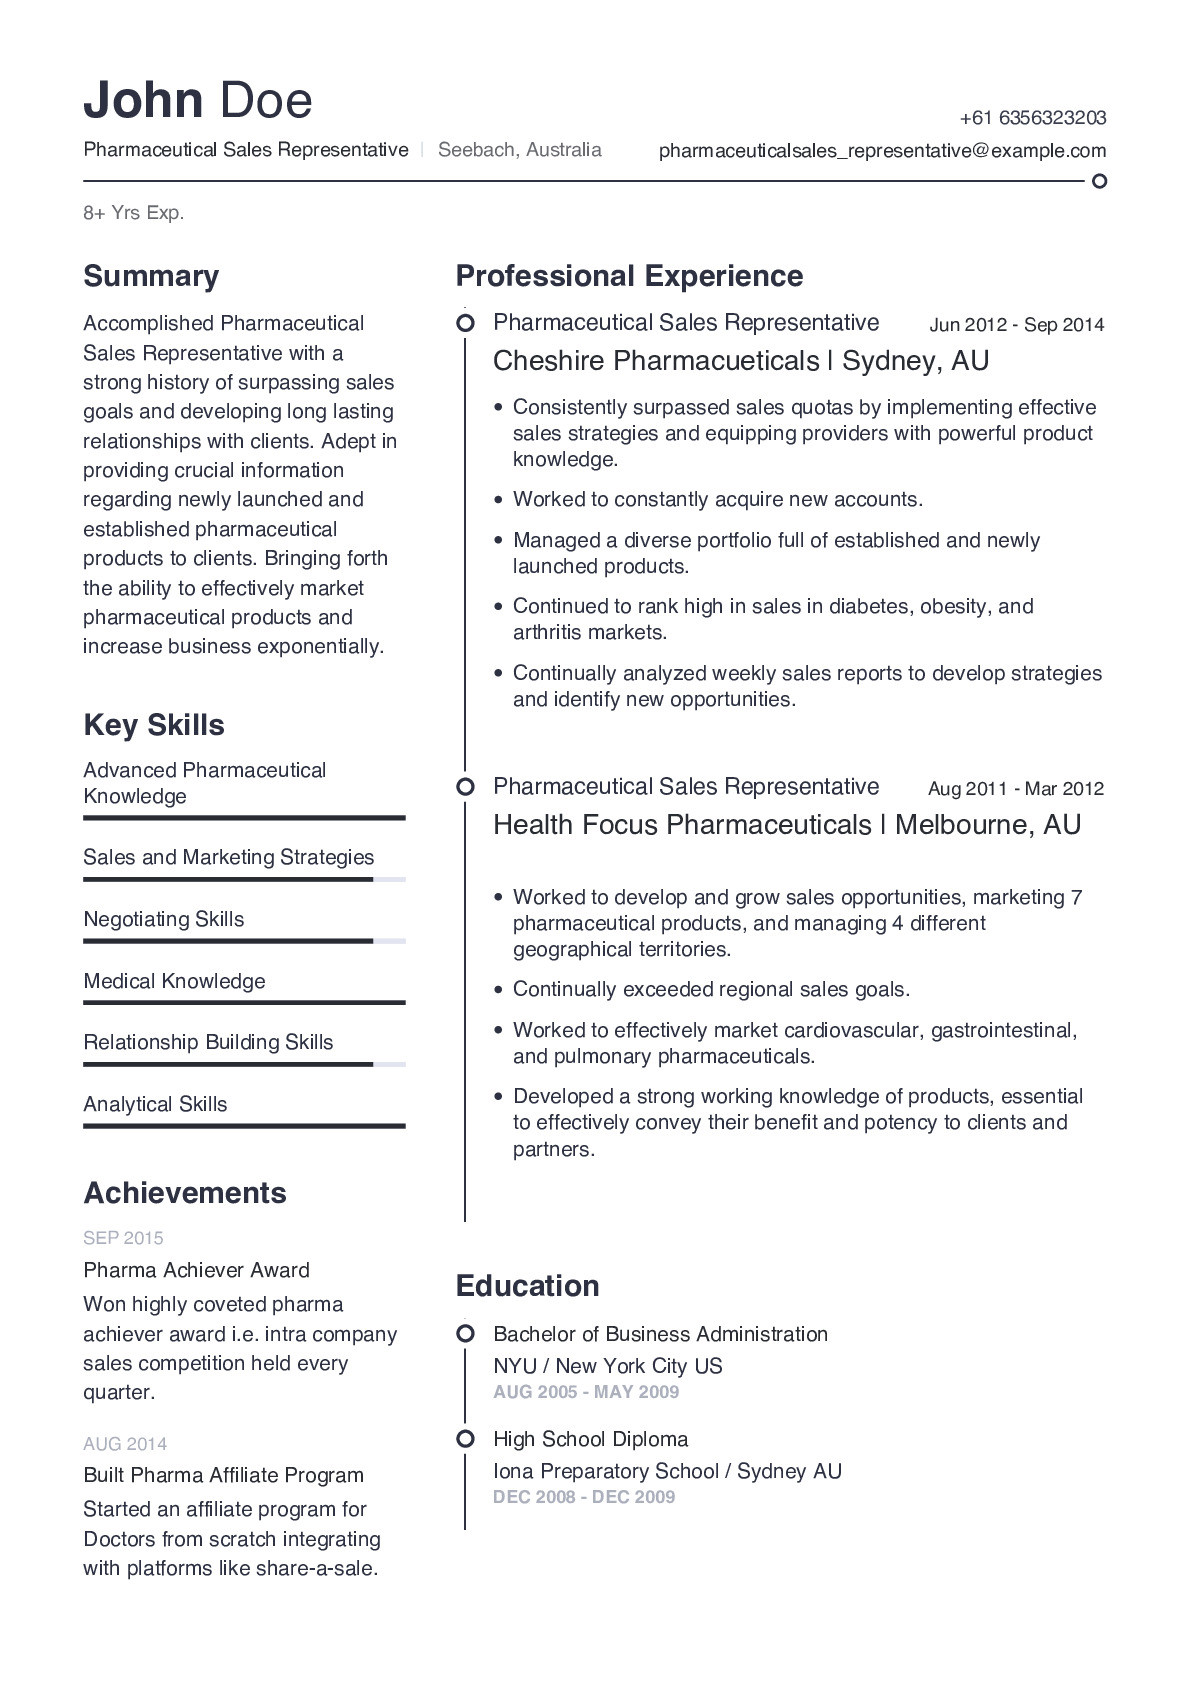 Sample Resume for A Pharmaceutical Sales Representative Amazing Pharmaceutical Sales Representative Resume Templates